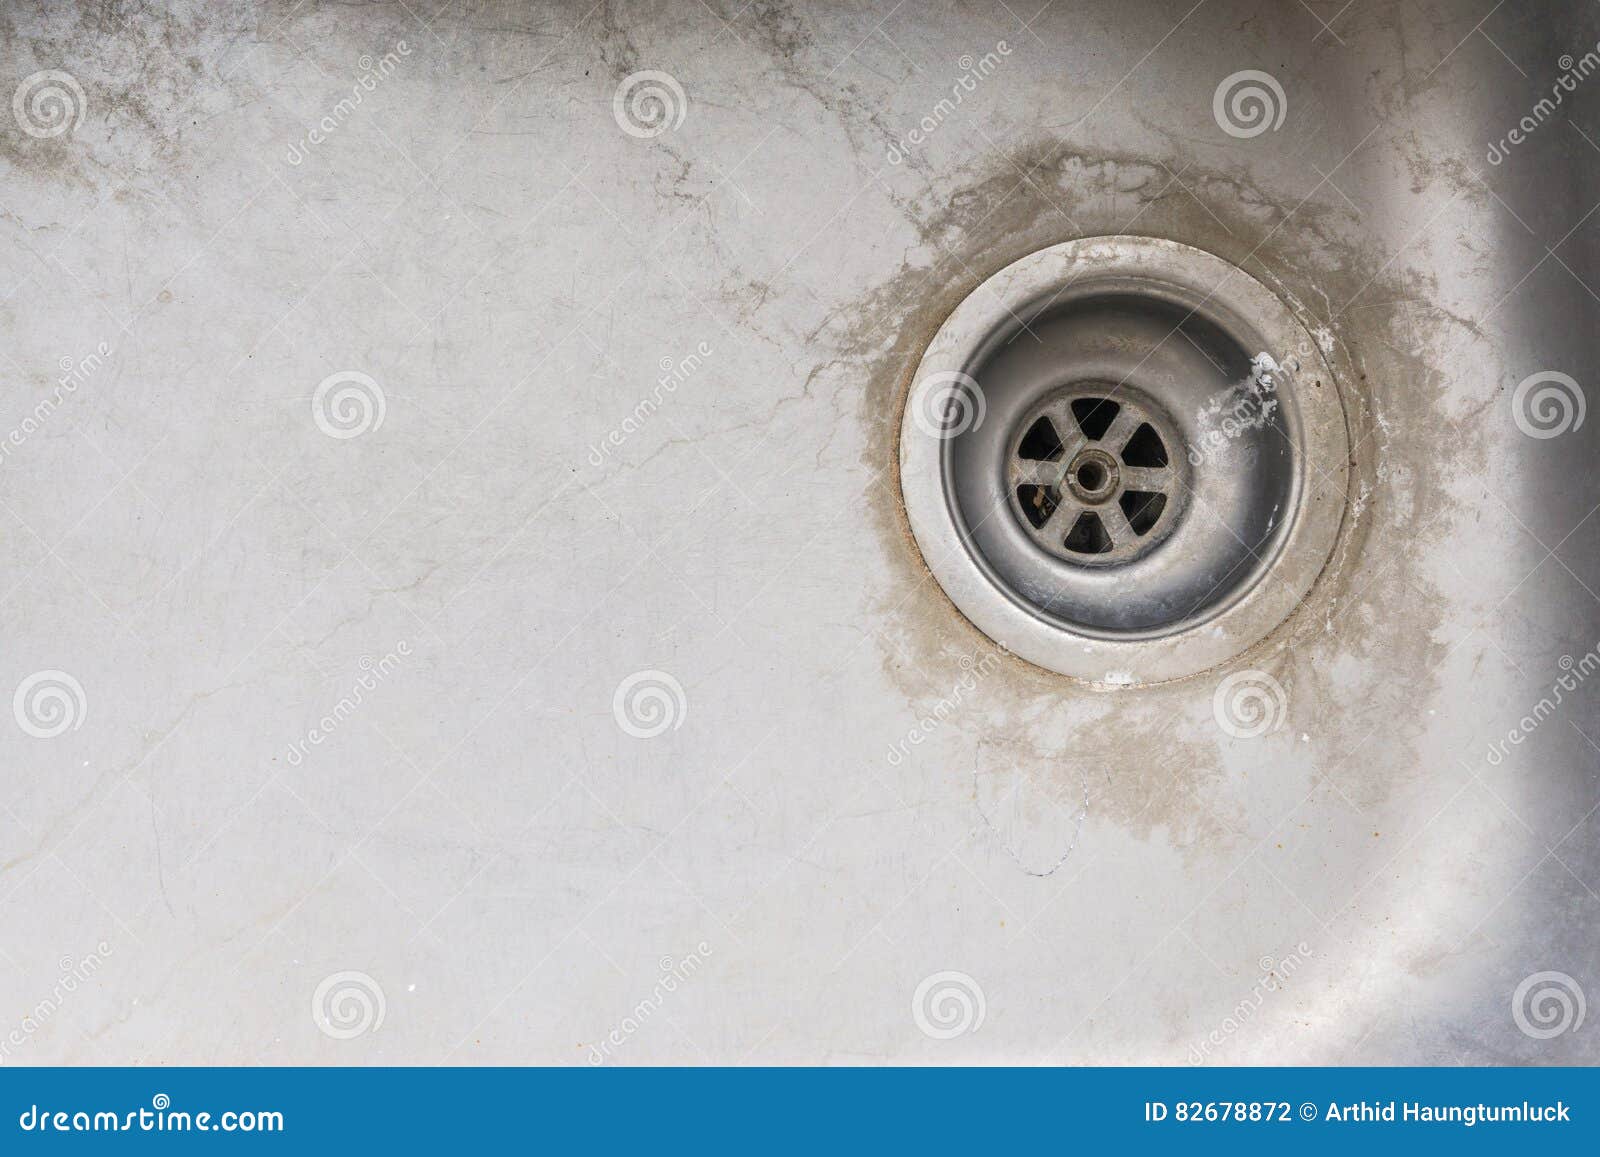 Grunge Old Dirty Metal Rusty Sink Drain Background Stock